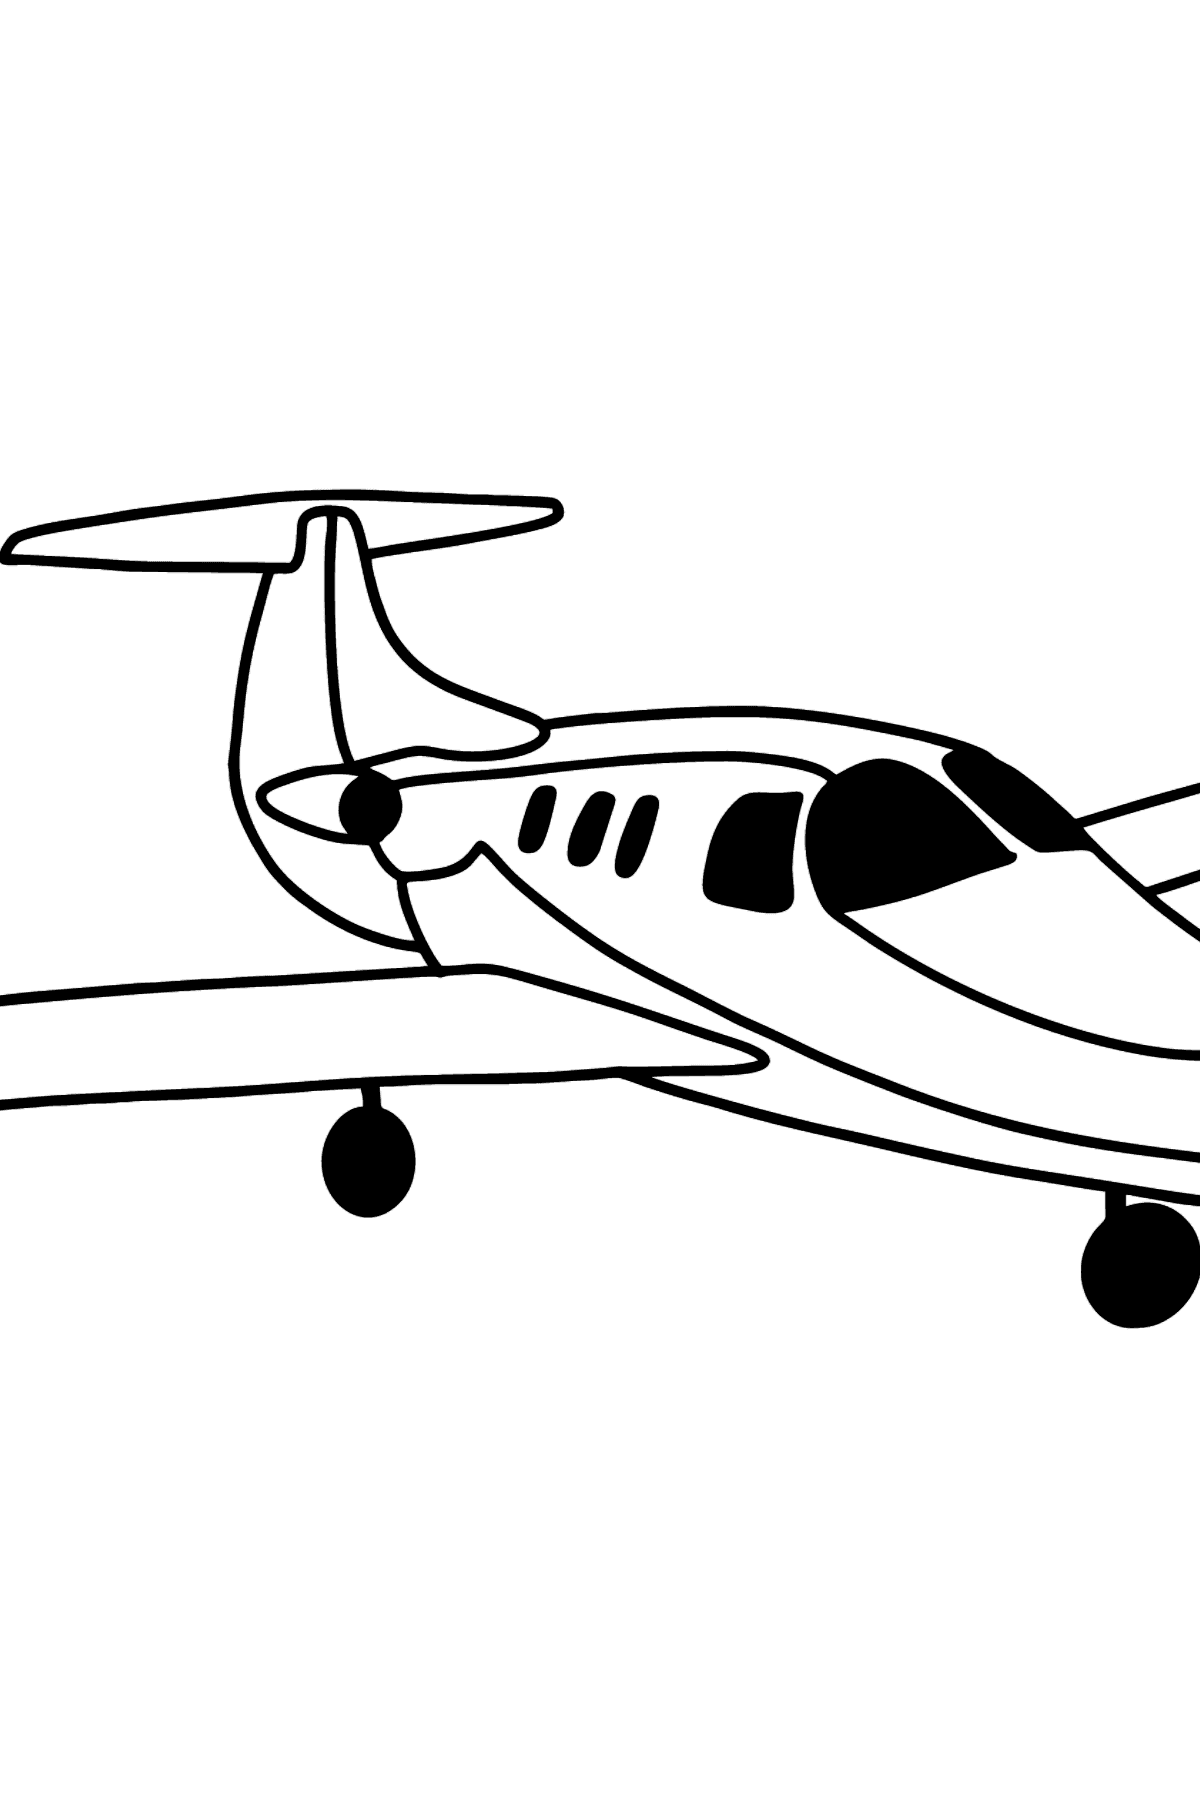 Airplane Private Jet coloring page - Coloring Pages for Kids